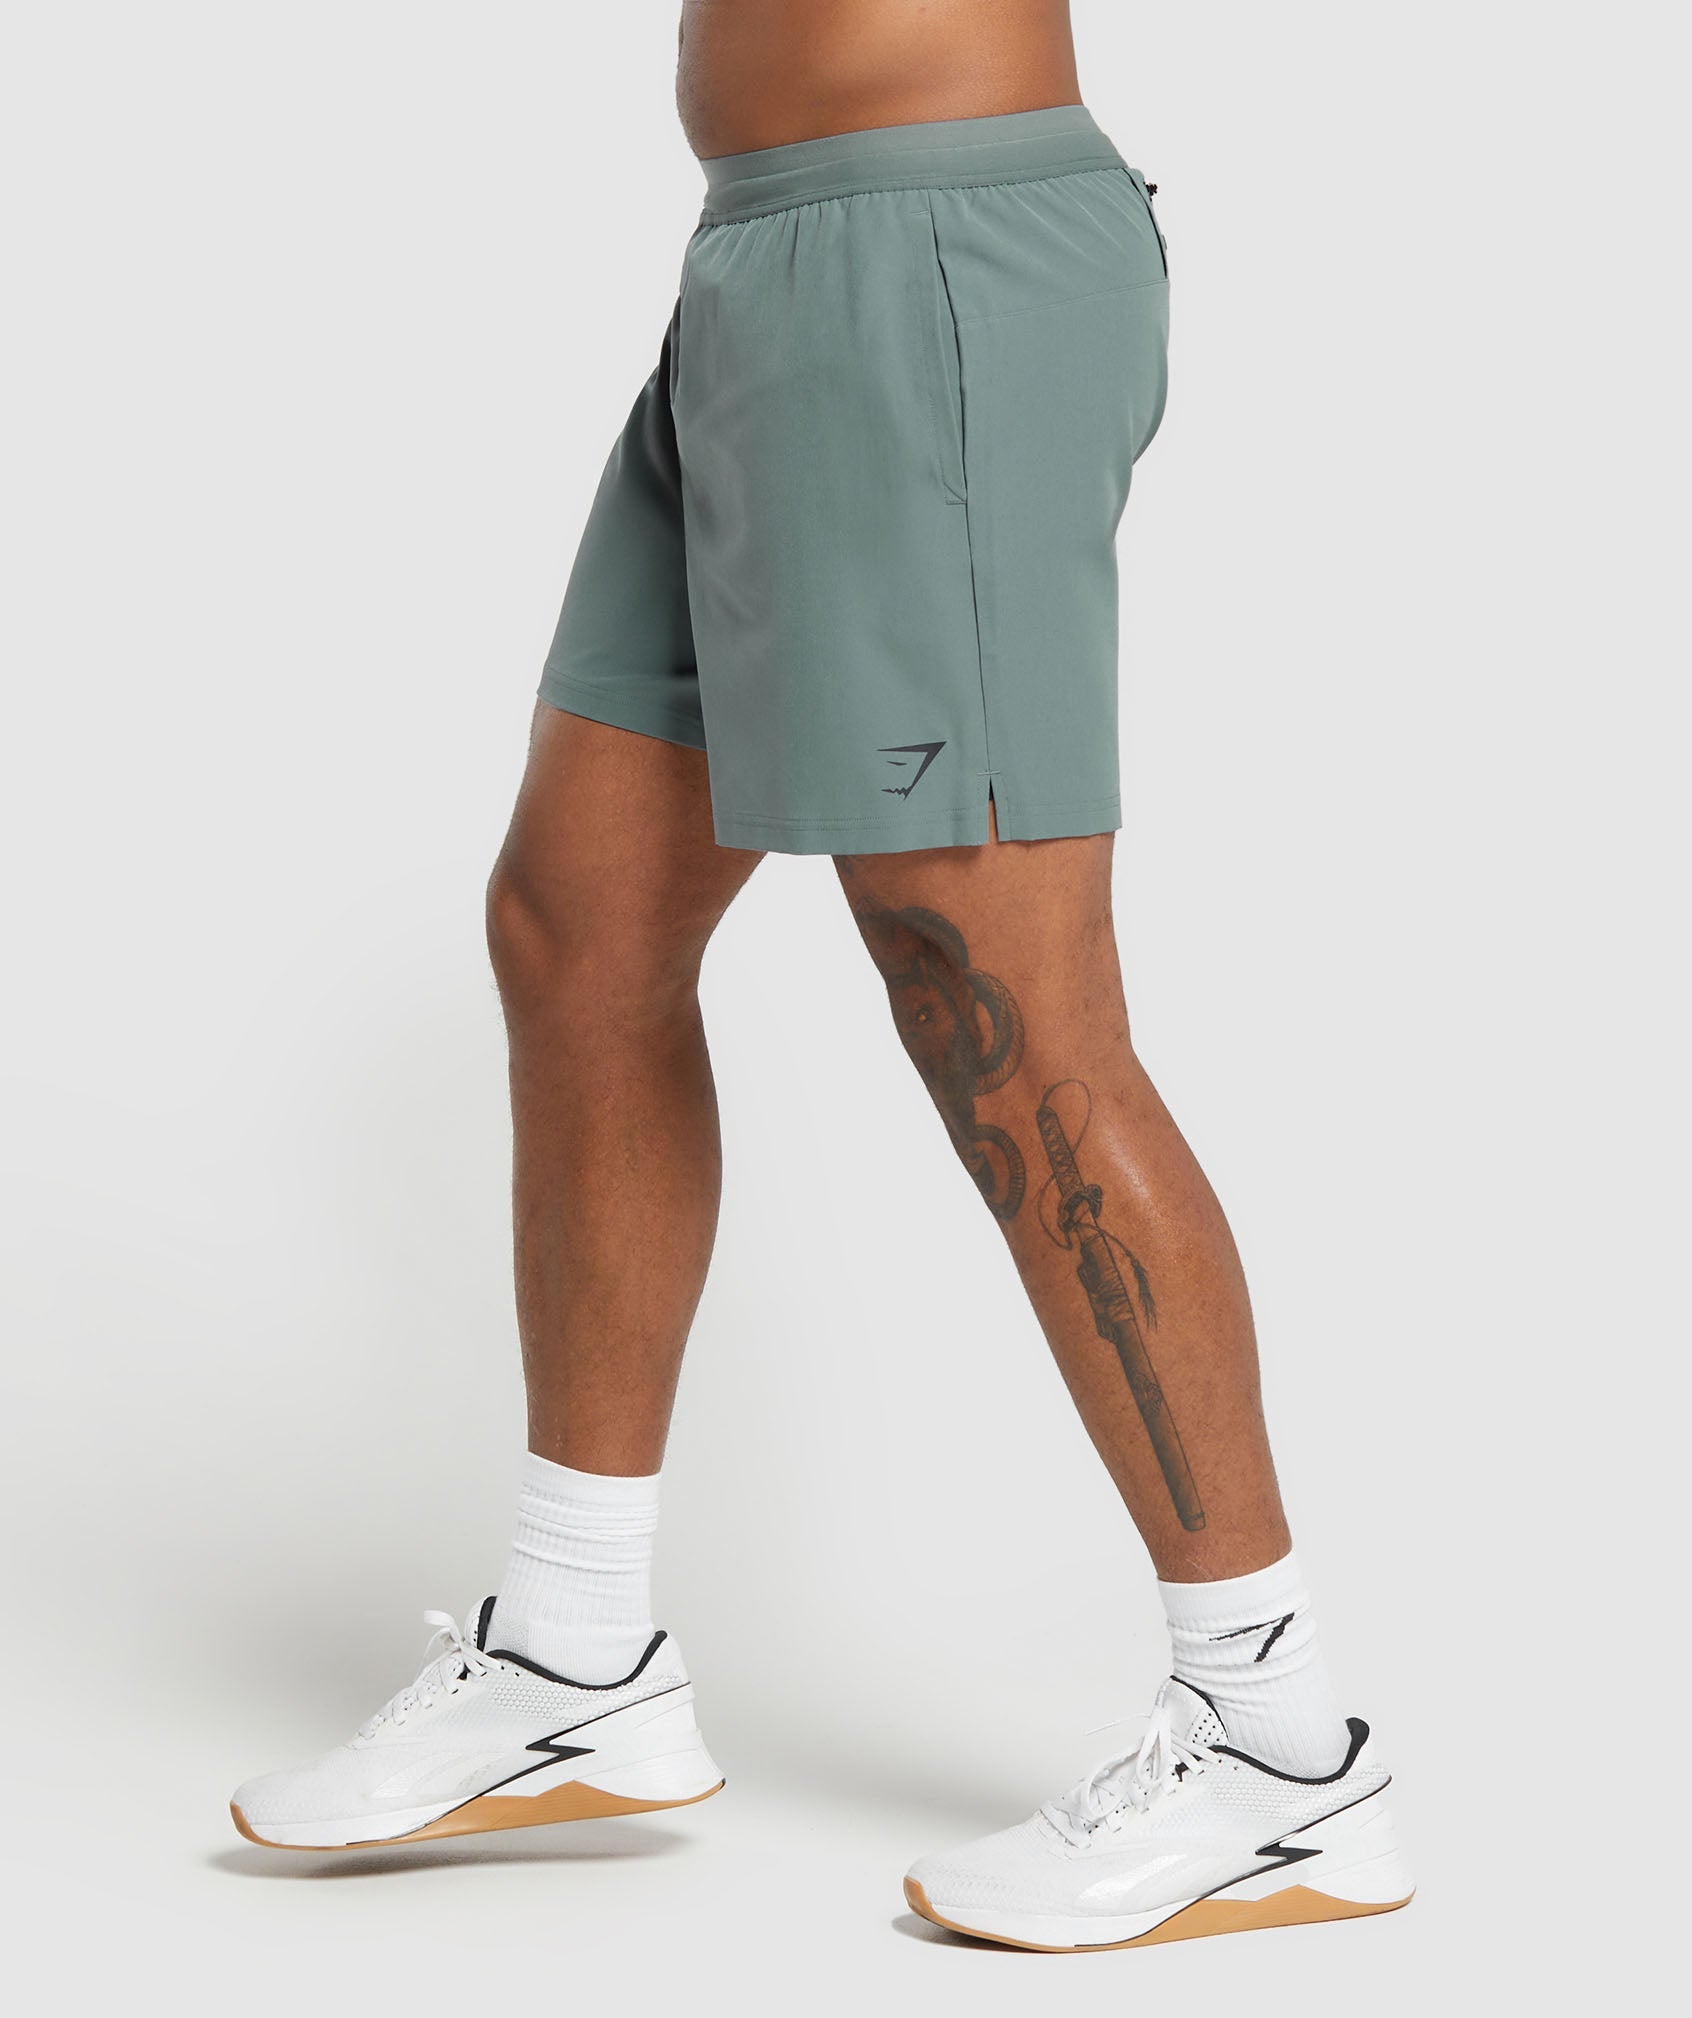 Land to Water 6" Shorts in Cargo Teal - view 3